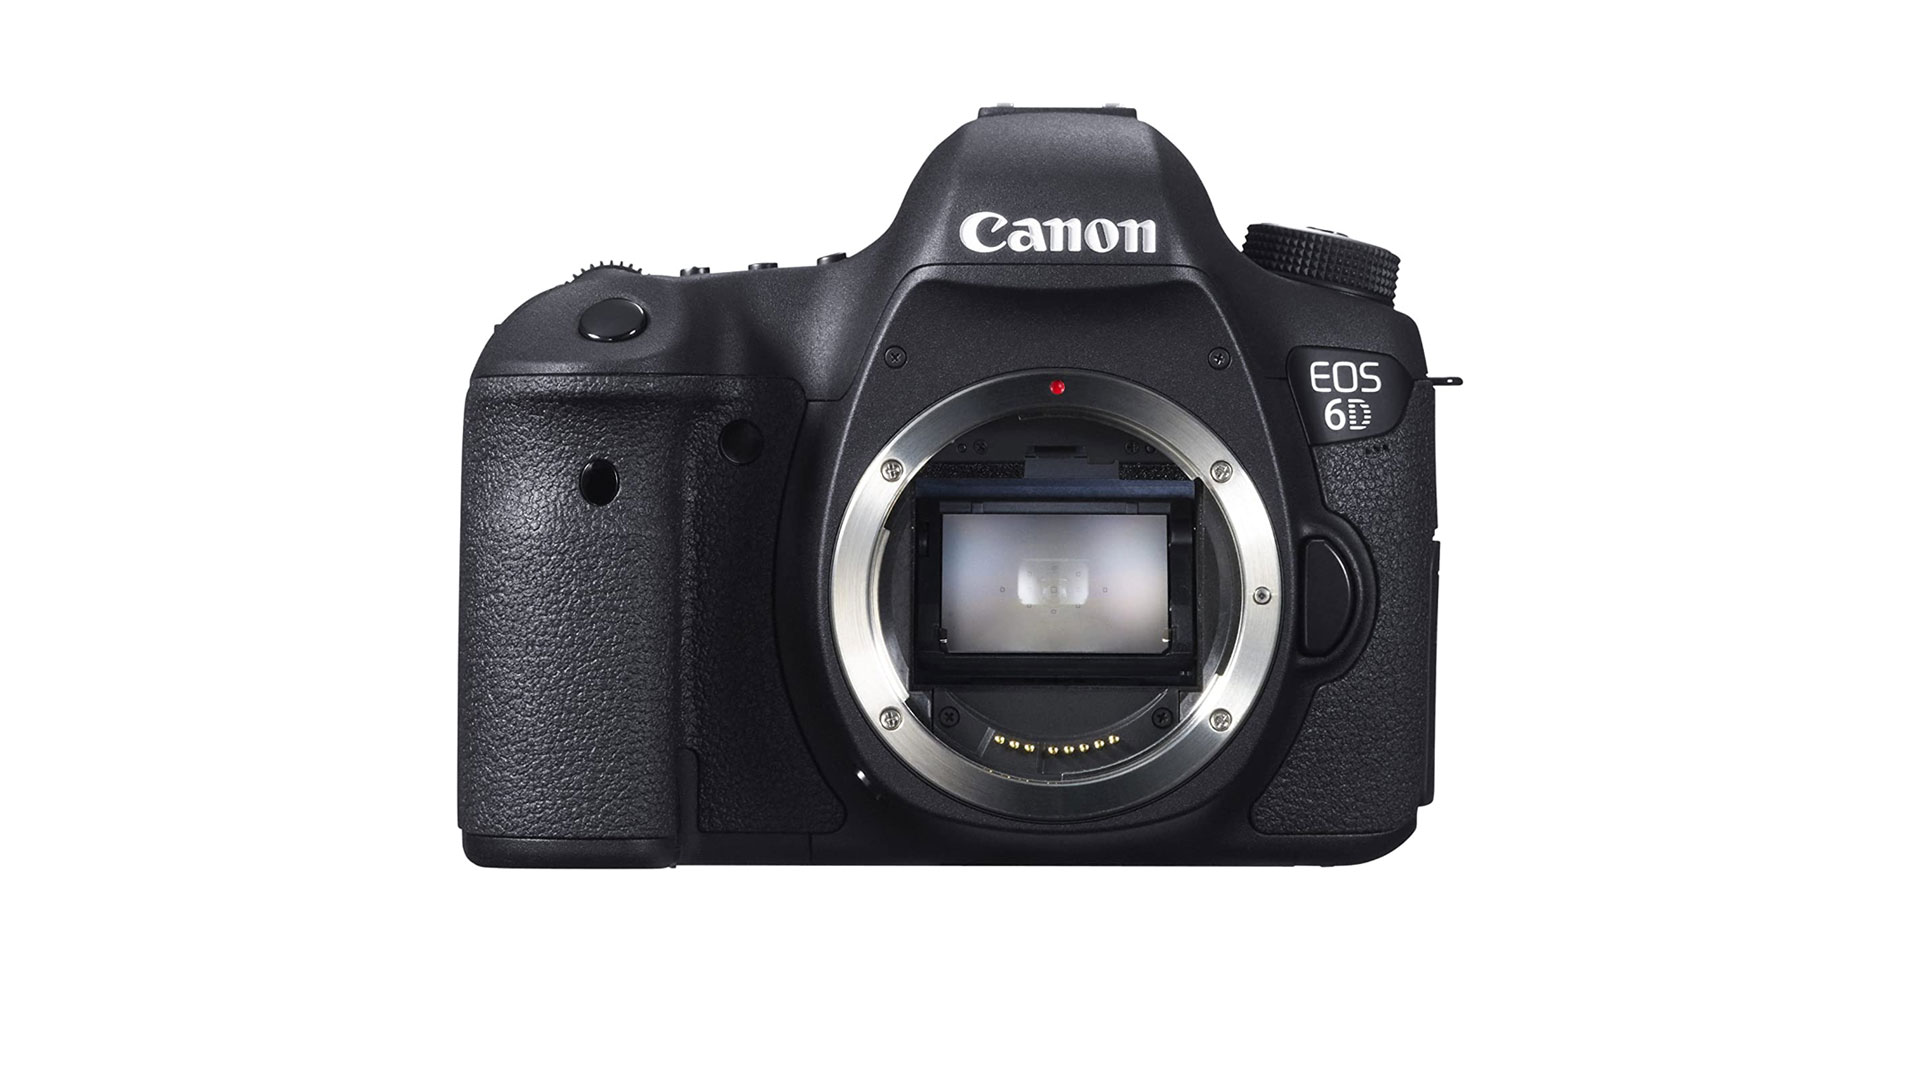 Canon EOS 6D review: Is it still one of the top astro shooters ...